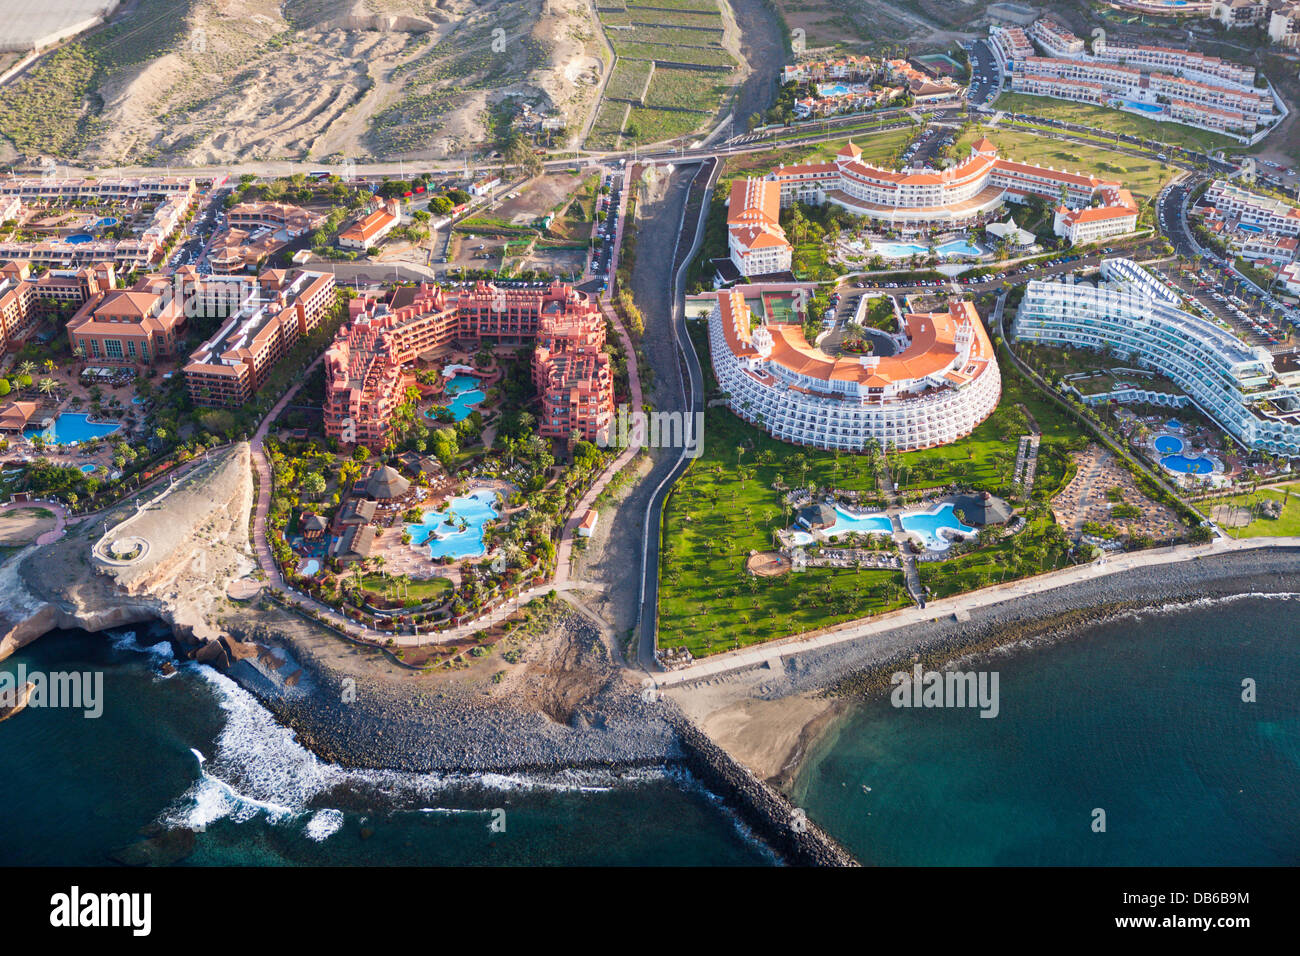 Hotel Facilities in South of Tenerife, Tenerife, Canary Islands, Spain Stock Photo